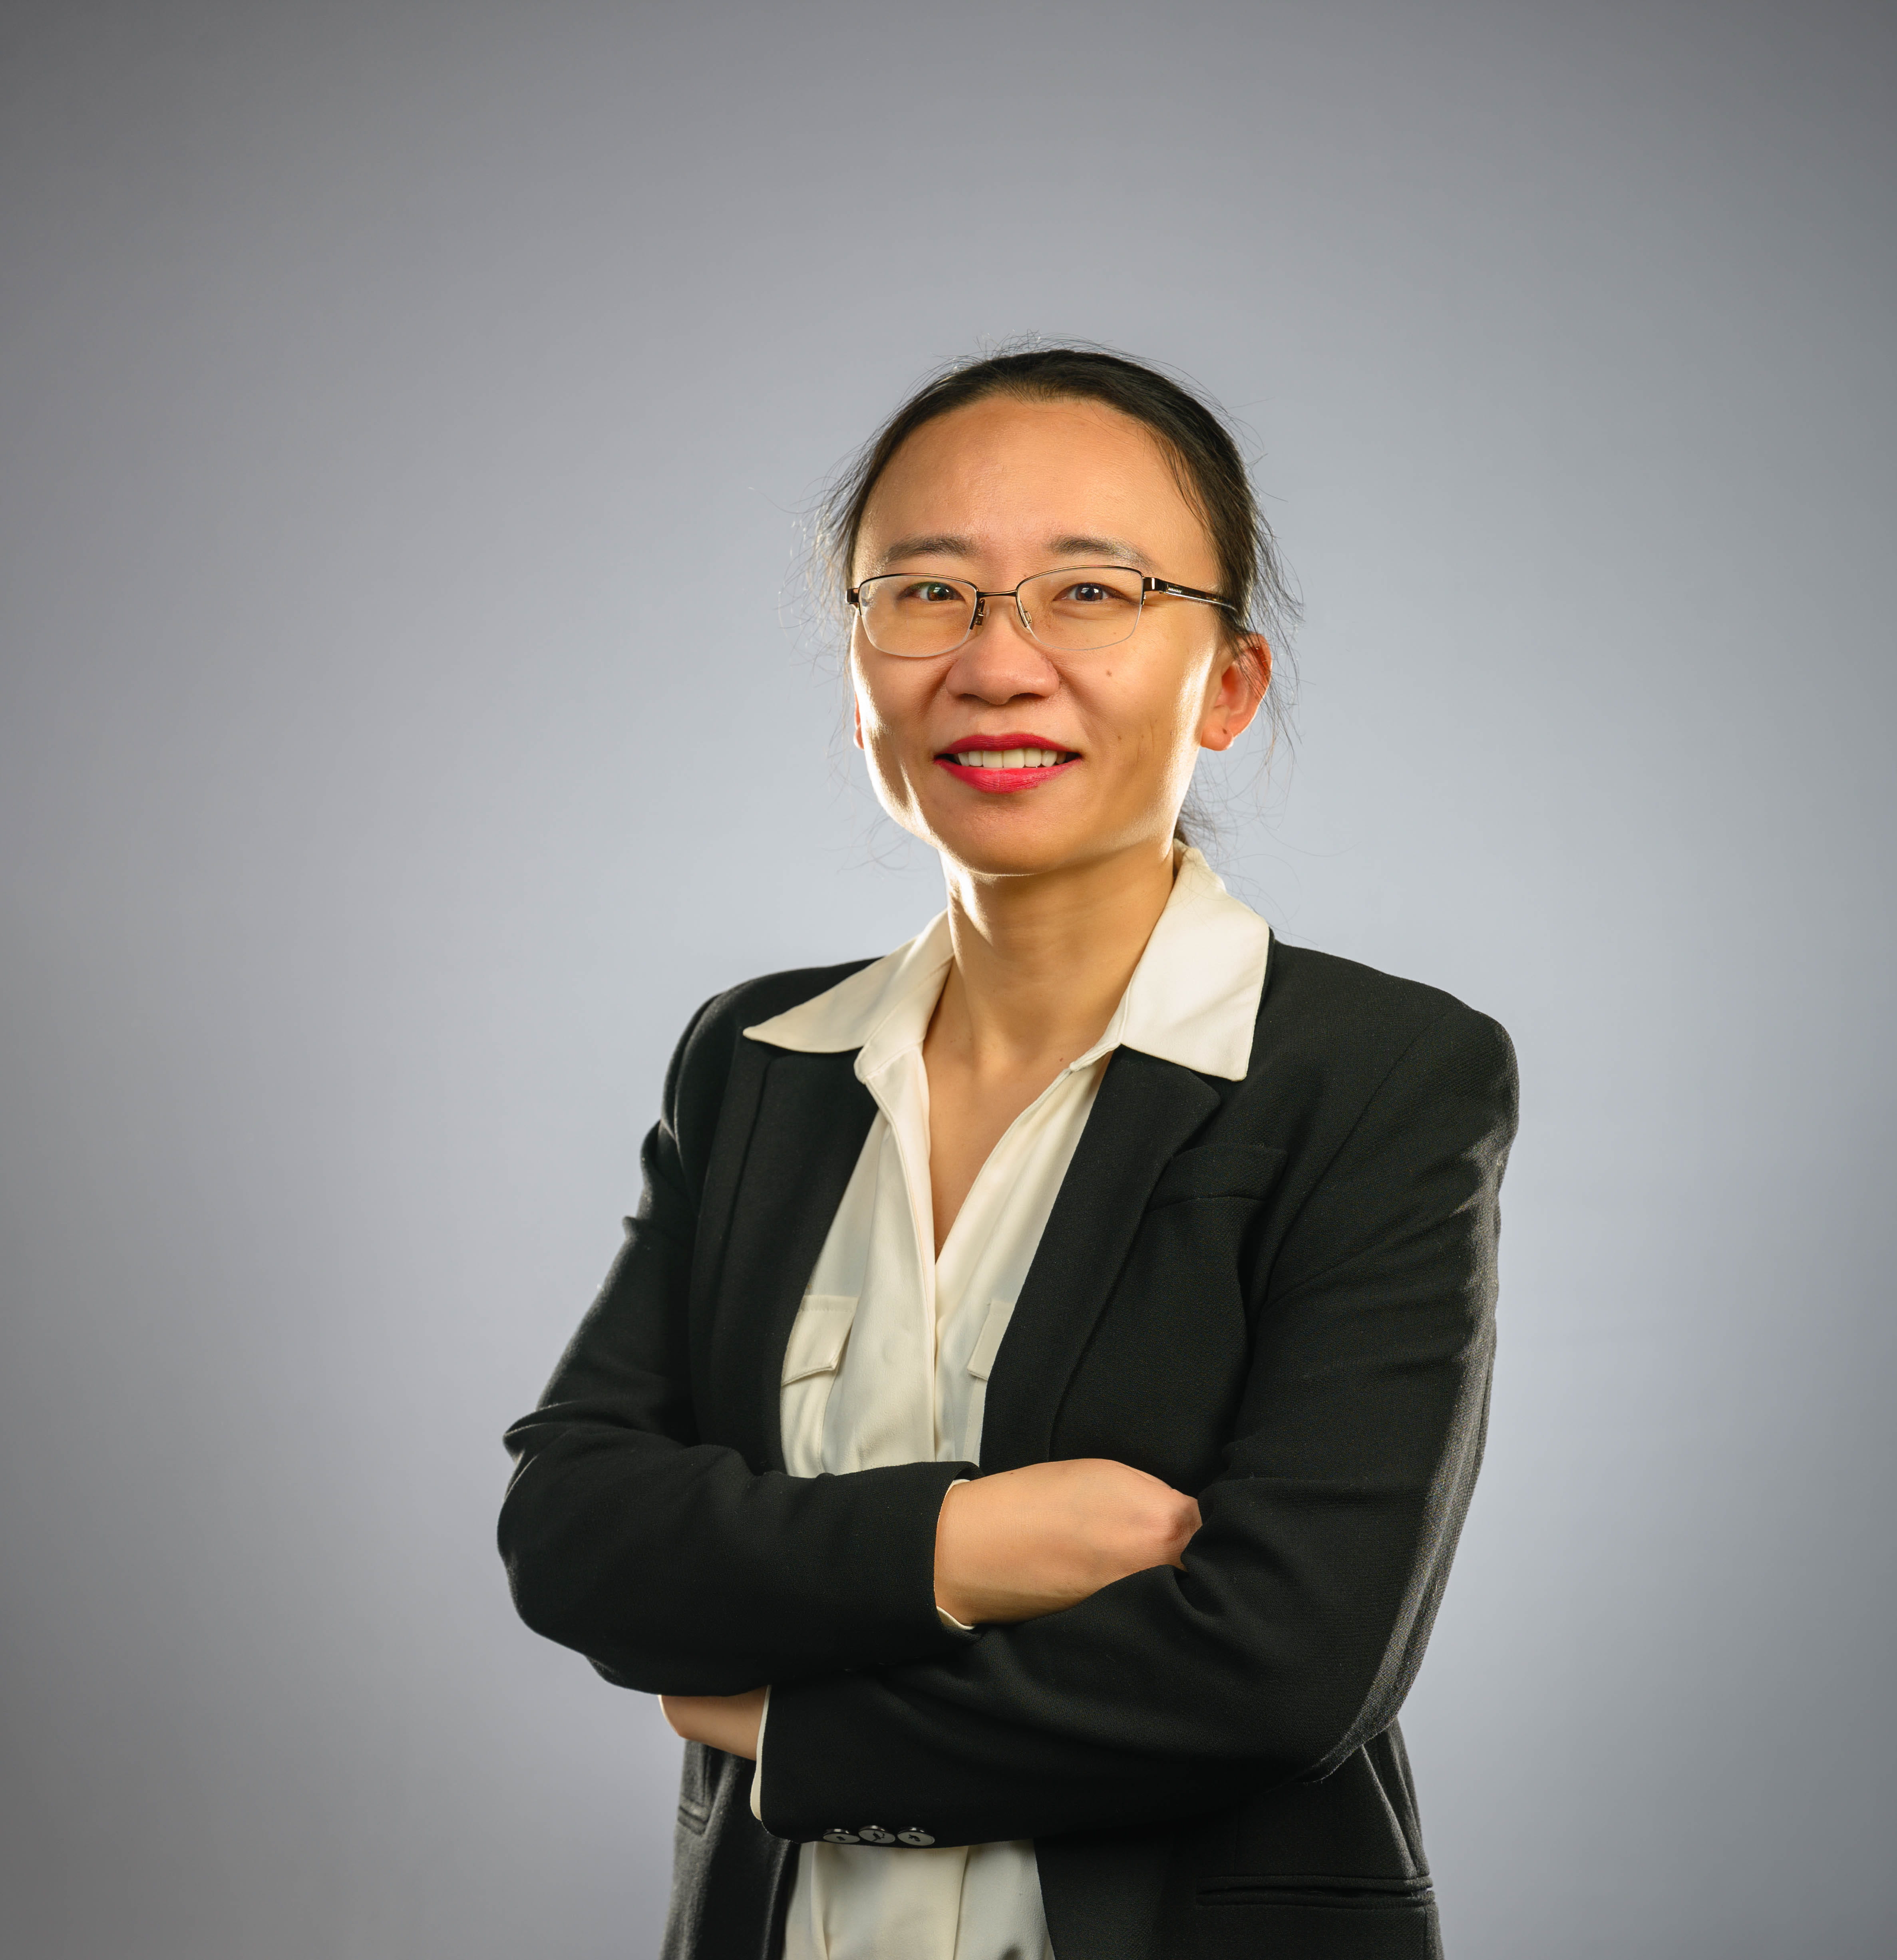 Jennifer Zhang, a UTA professor in the College of Business' Department of Information Systems and Operations Management